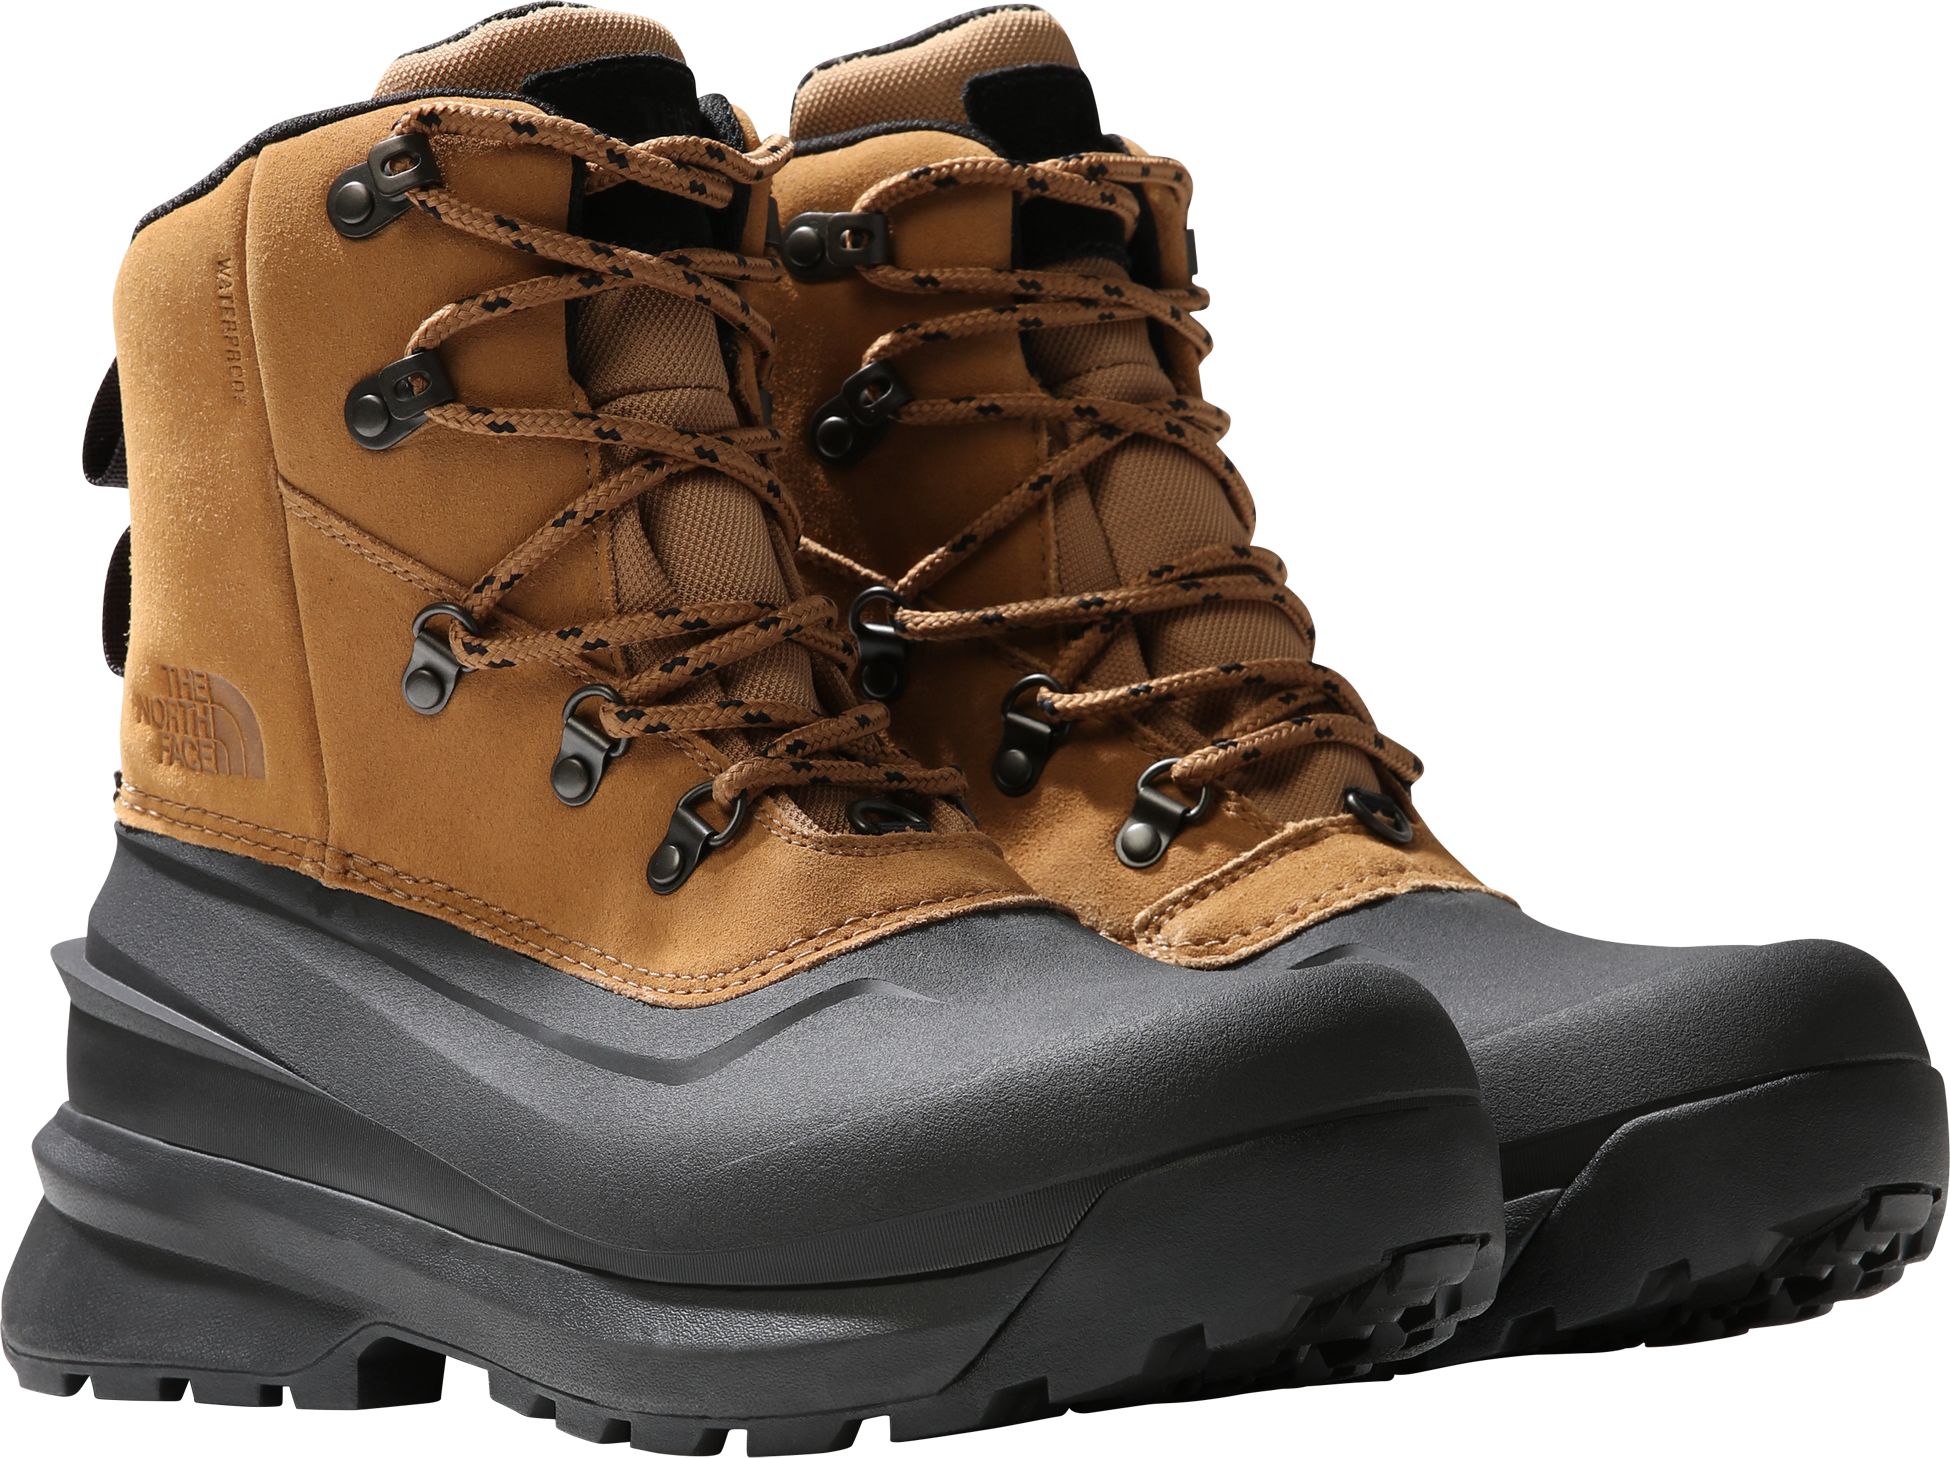 THE NORTH FACE, M CHILKAT V LACE WP